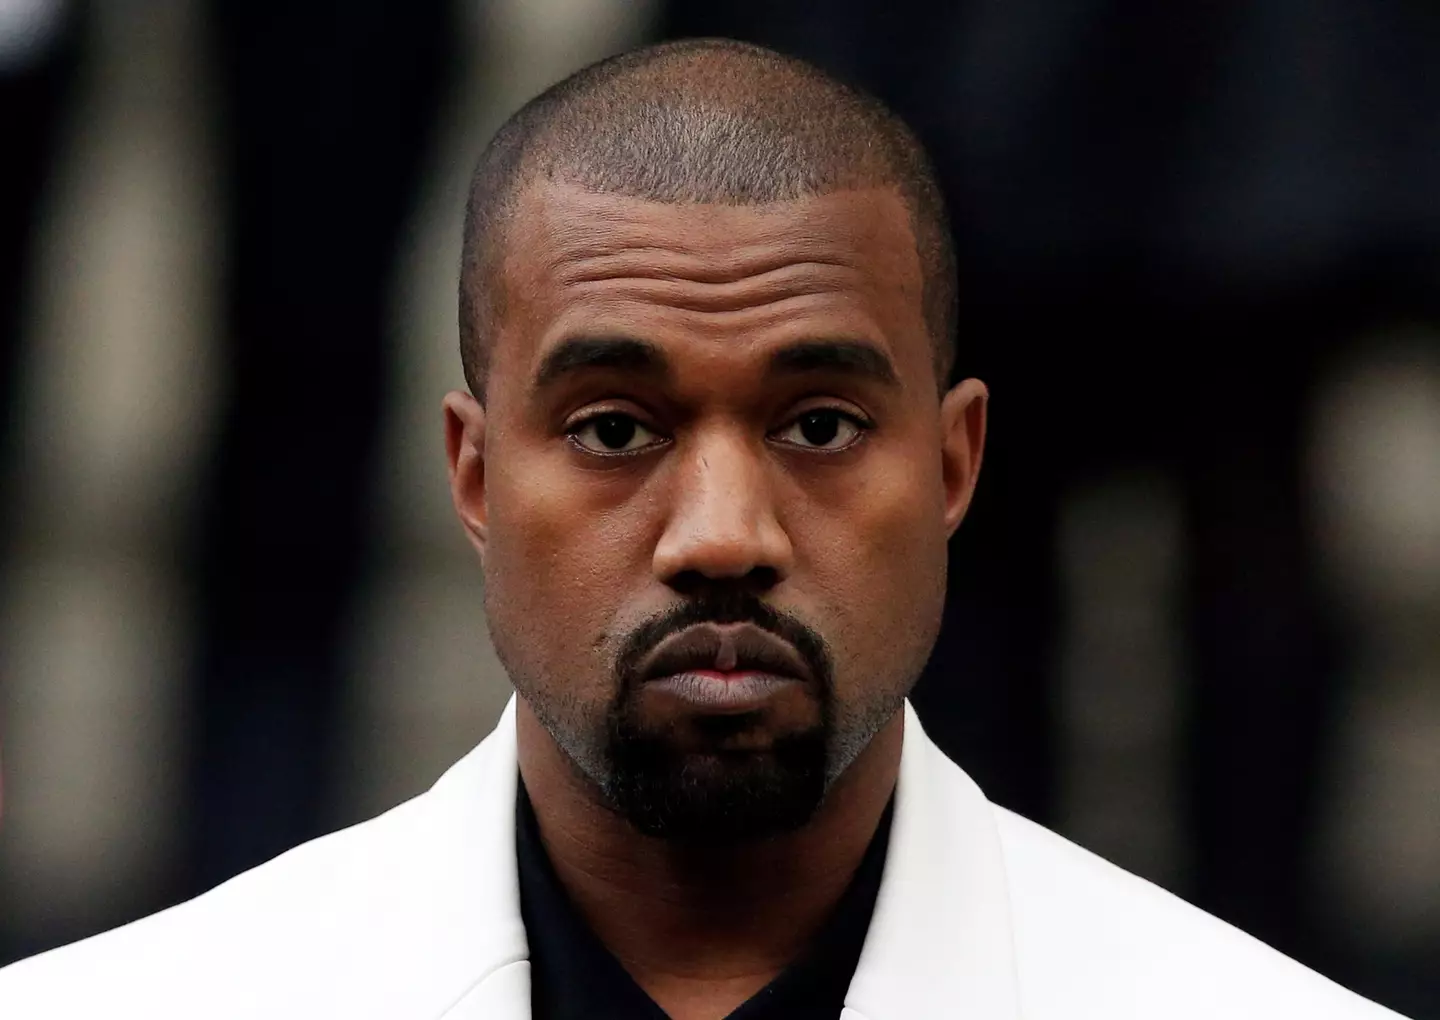 Kanye West is being shunned after making antisemitic comments.